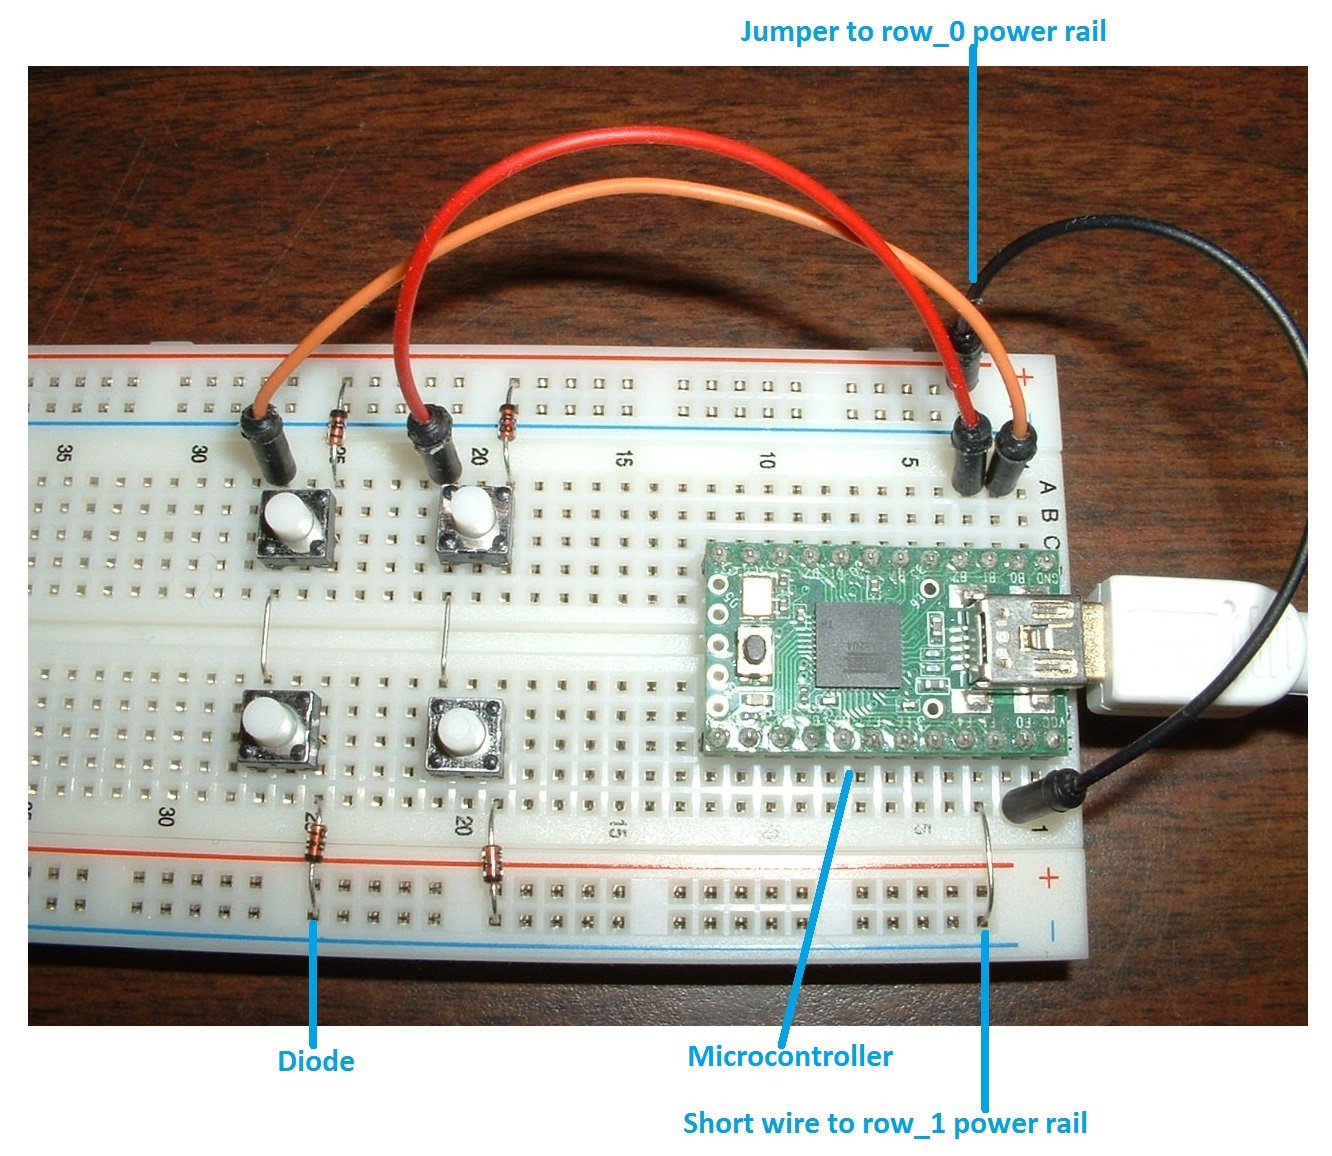 breadboard keyboard with 2 rows and 2 columns